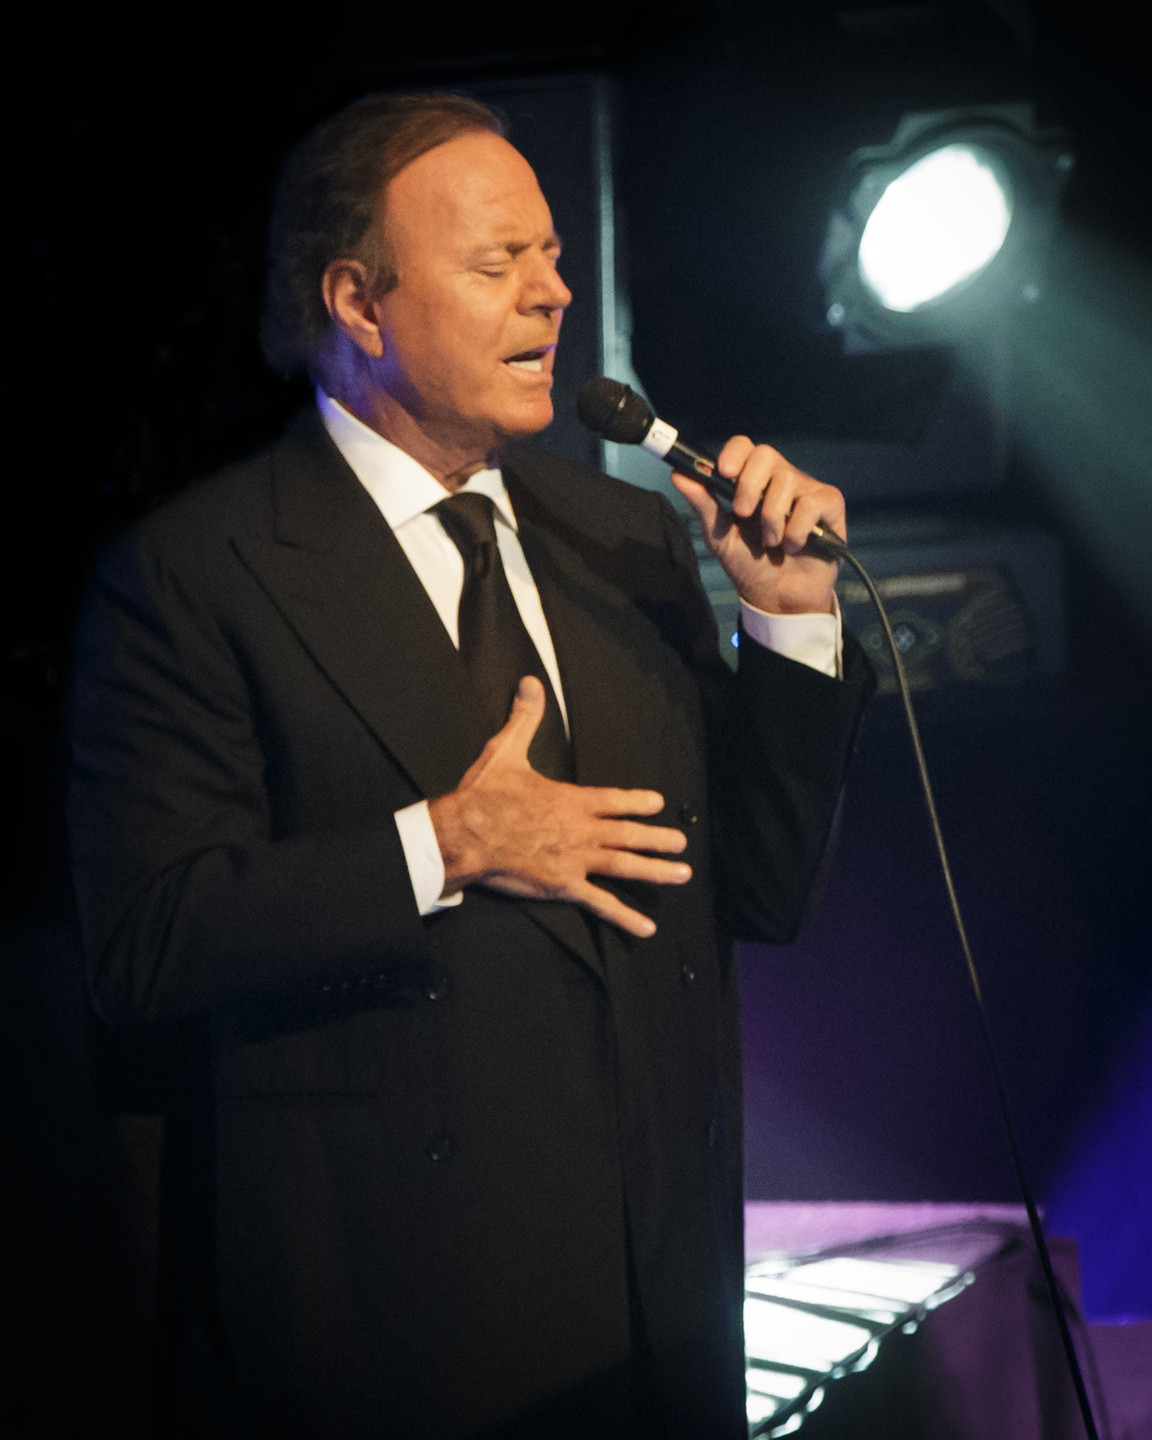 Julio Iglesias has the women rushing the stage in Austin